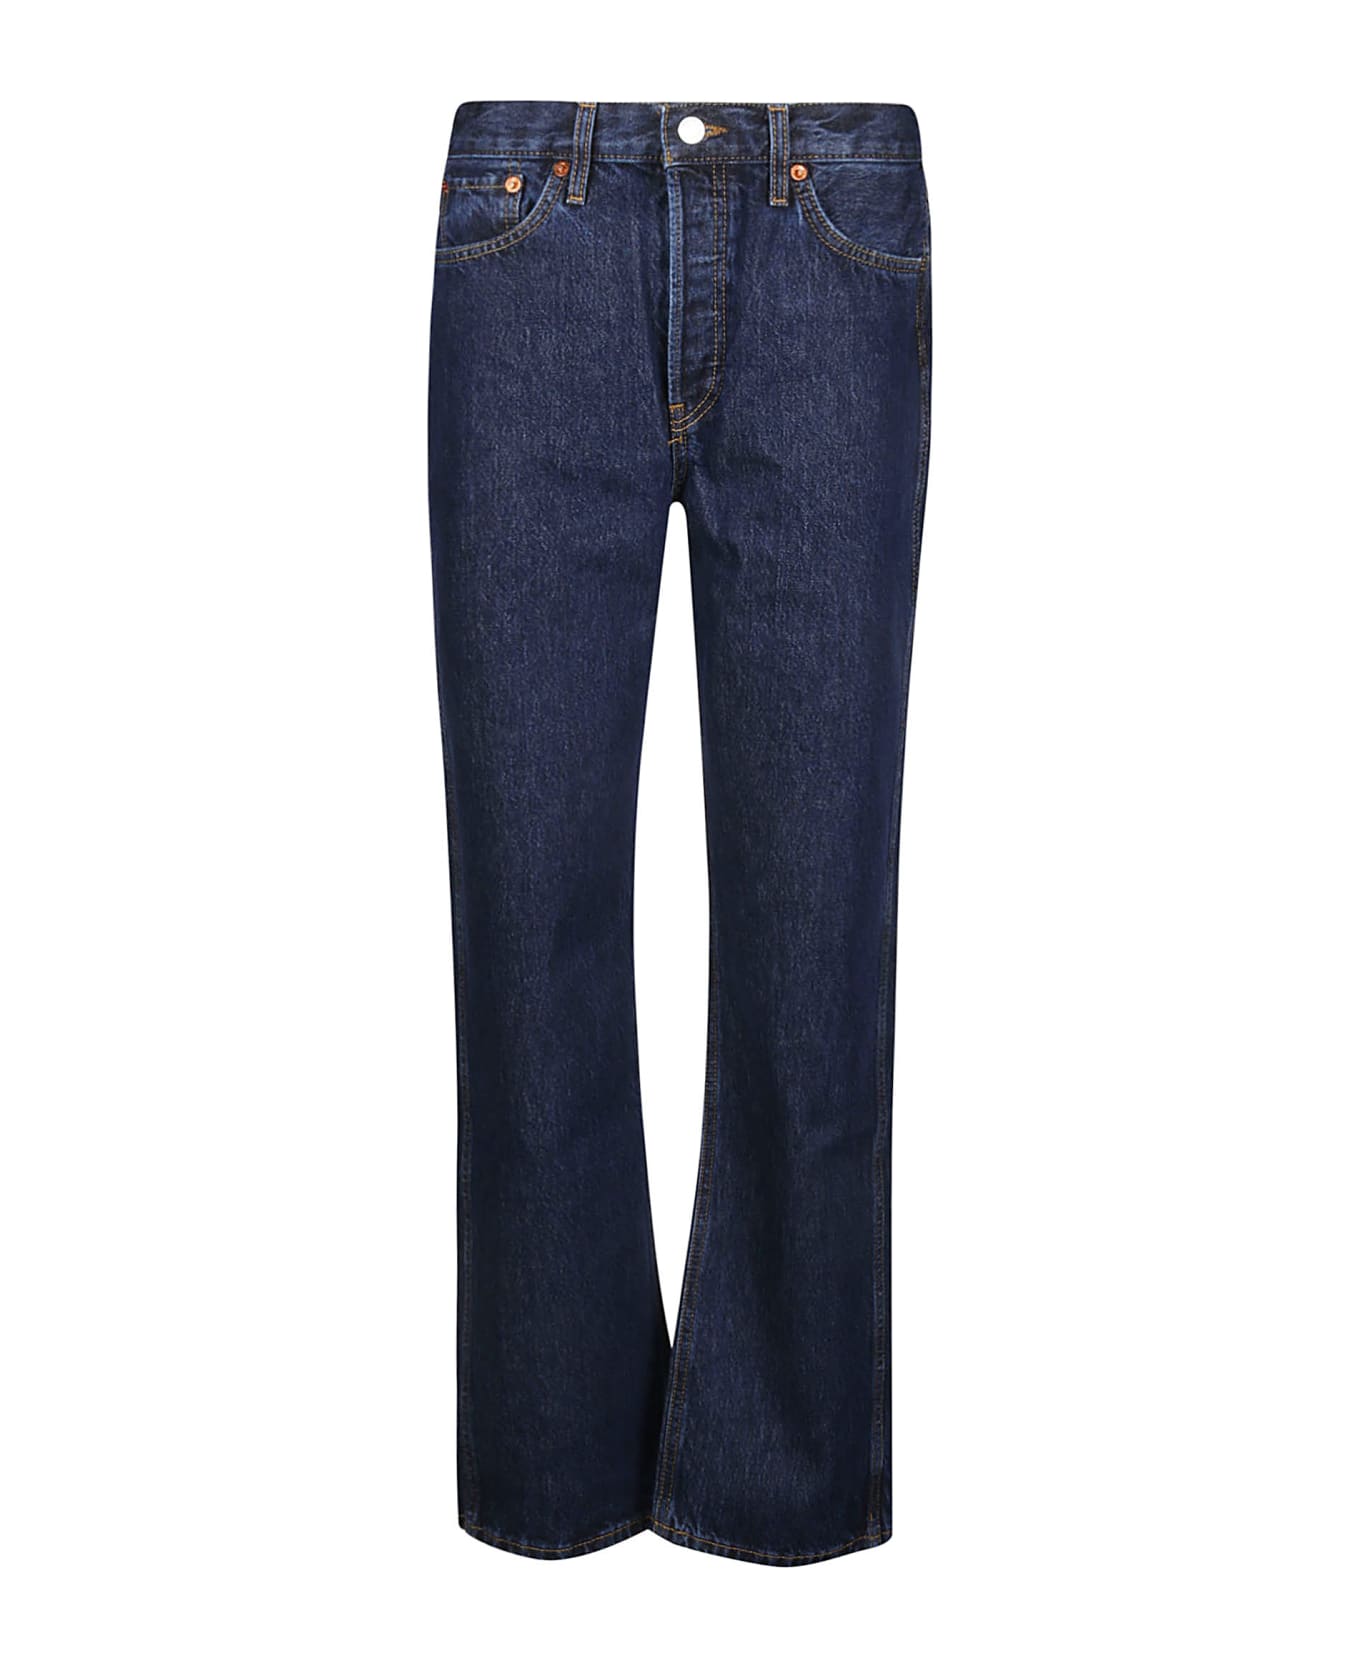 RE/DONE 90s High Rise Loose Jeans - Heritage Rinse